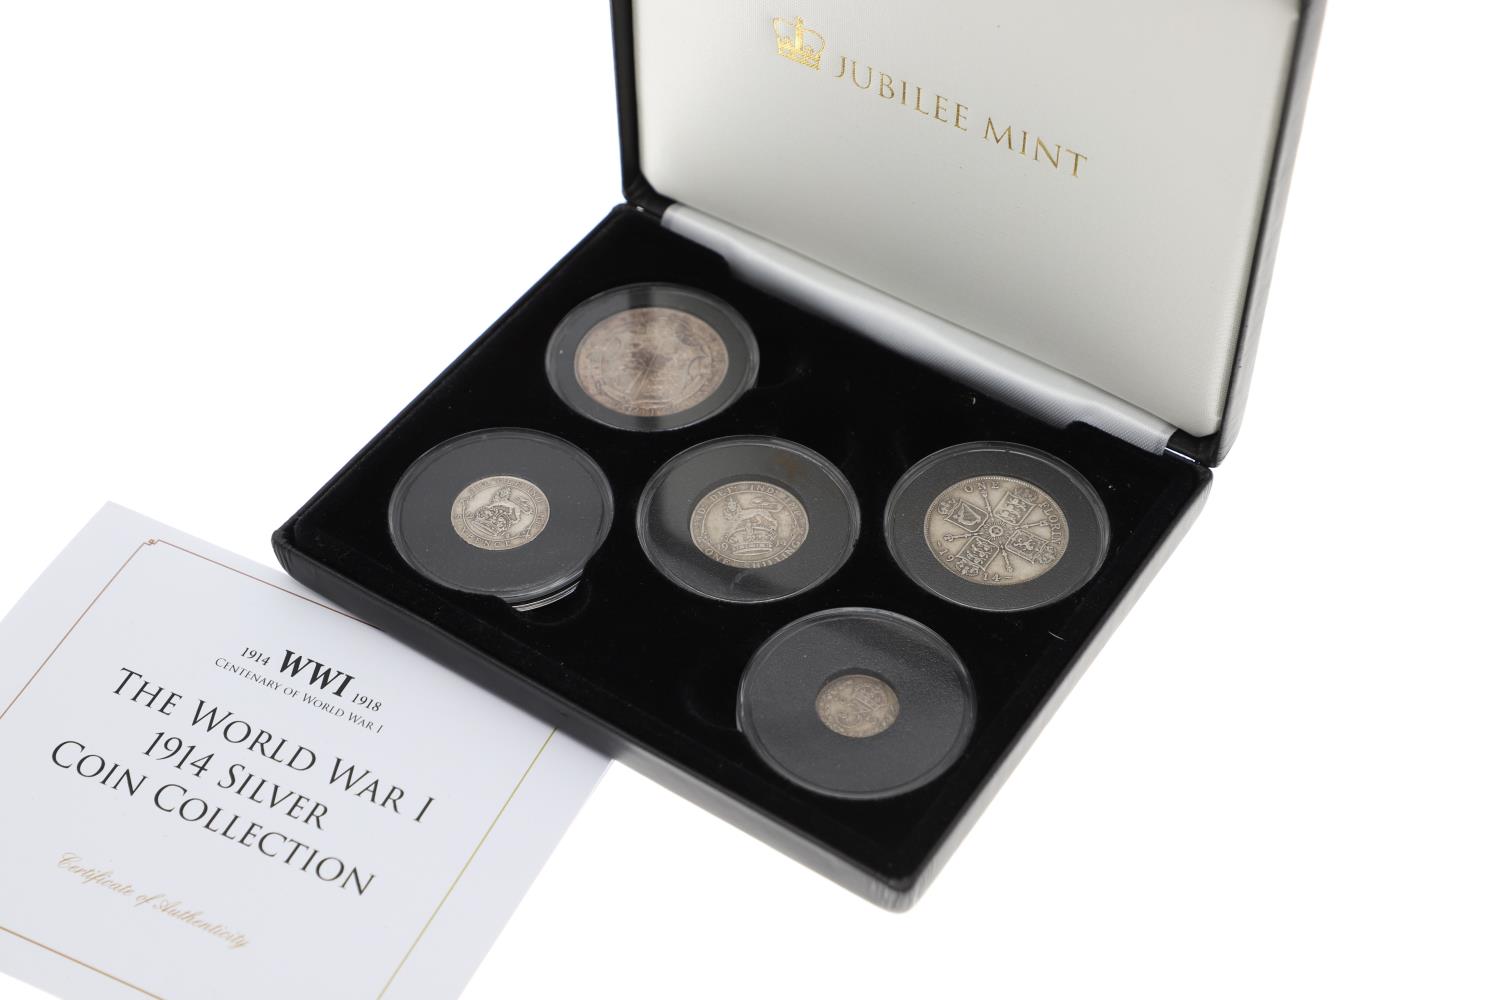 A COLLECTION OF JUBILEE MINT AND OTHER SETS OF PRE-DECIMAL COINS IN PRESENTATION CASES. - Image 10 of 13